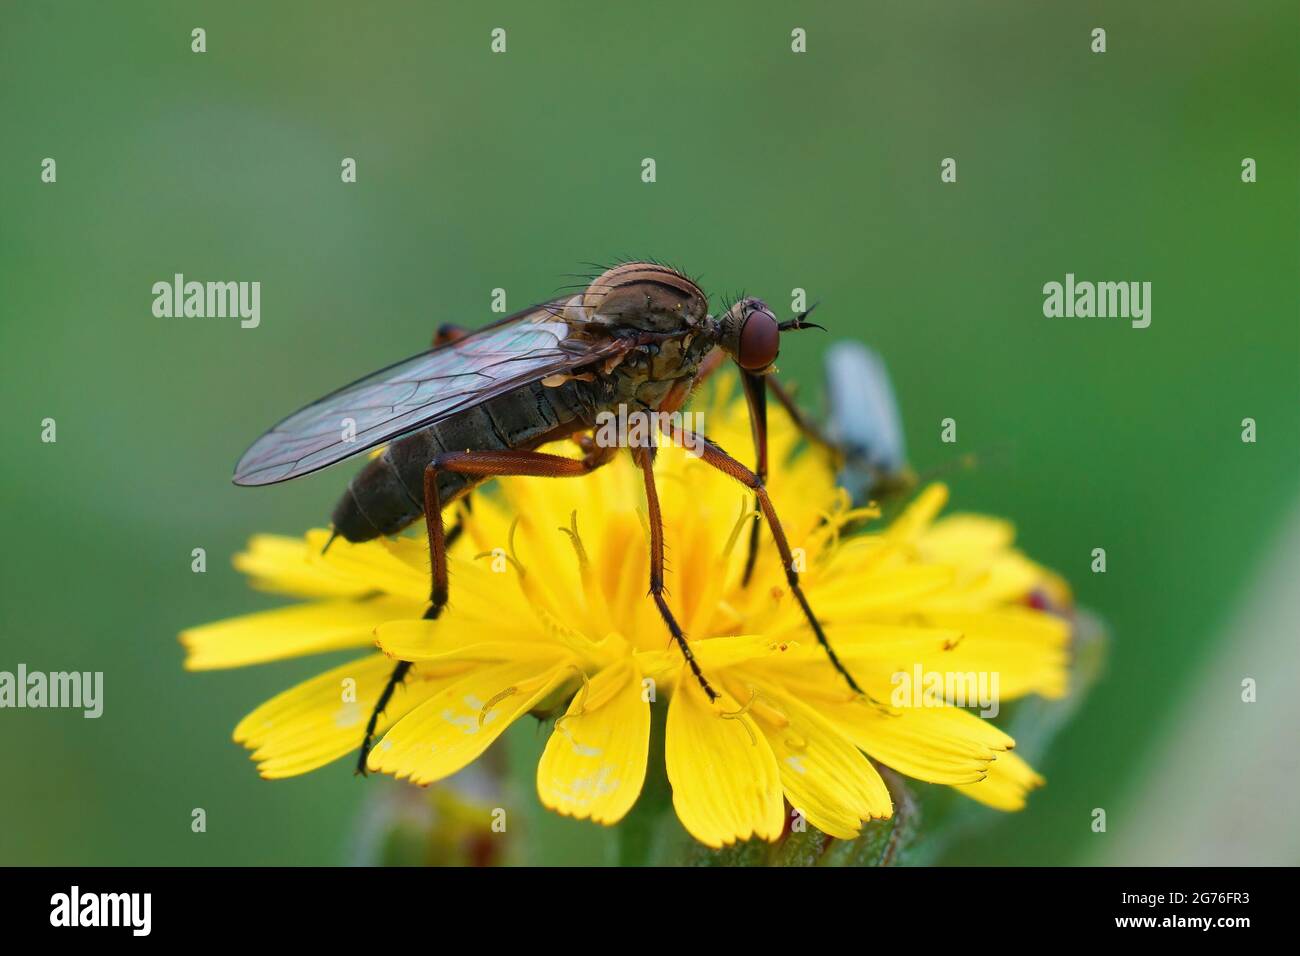 A closeup shot of the Migrant hoverfly on a yellow flower Stock Photo